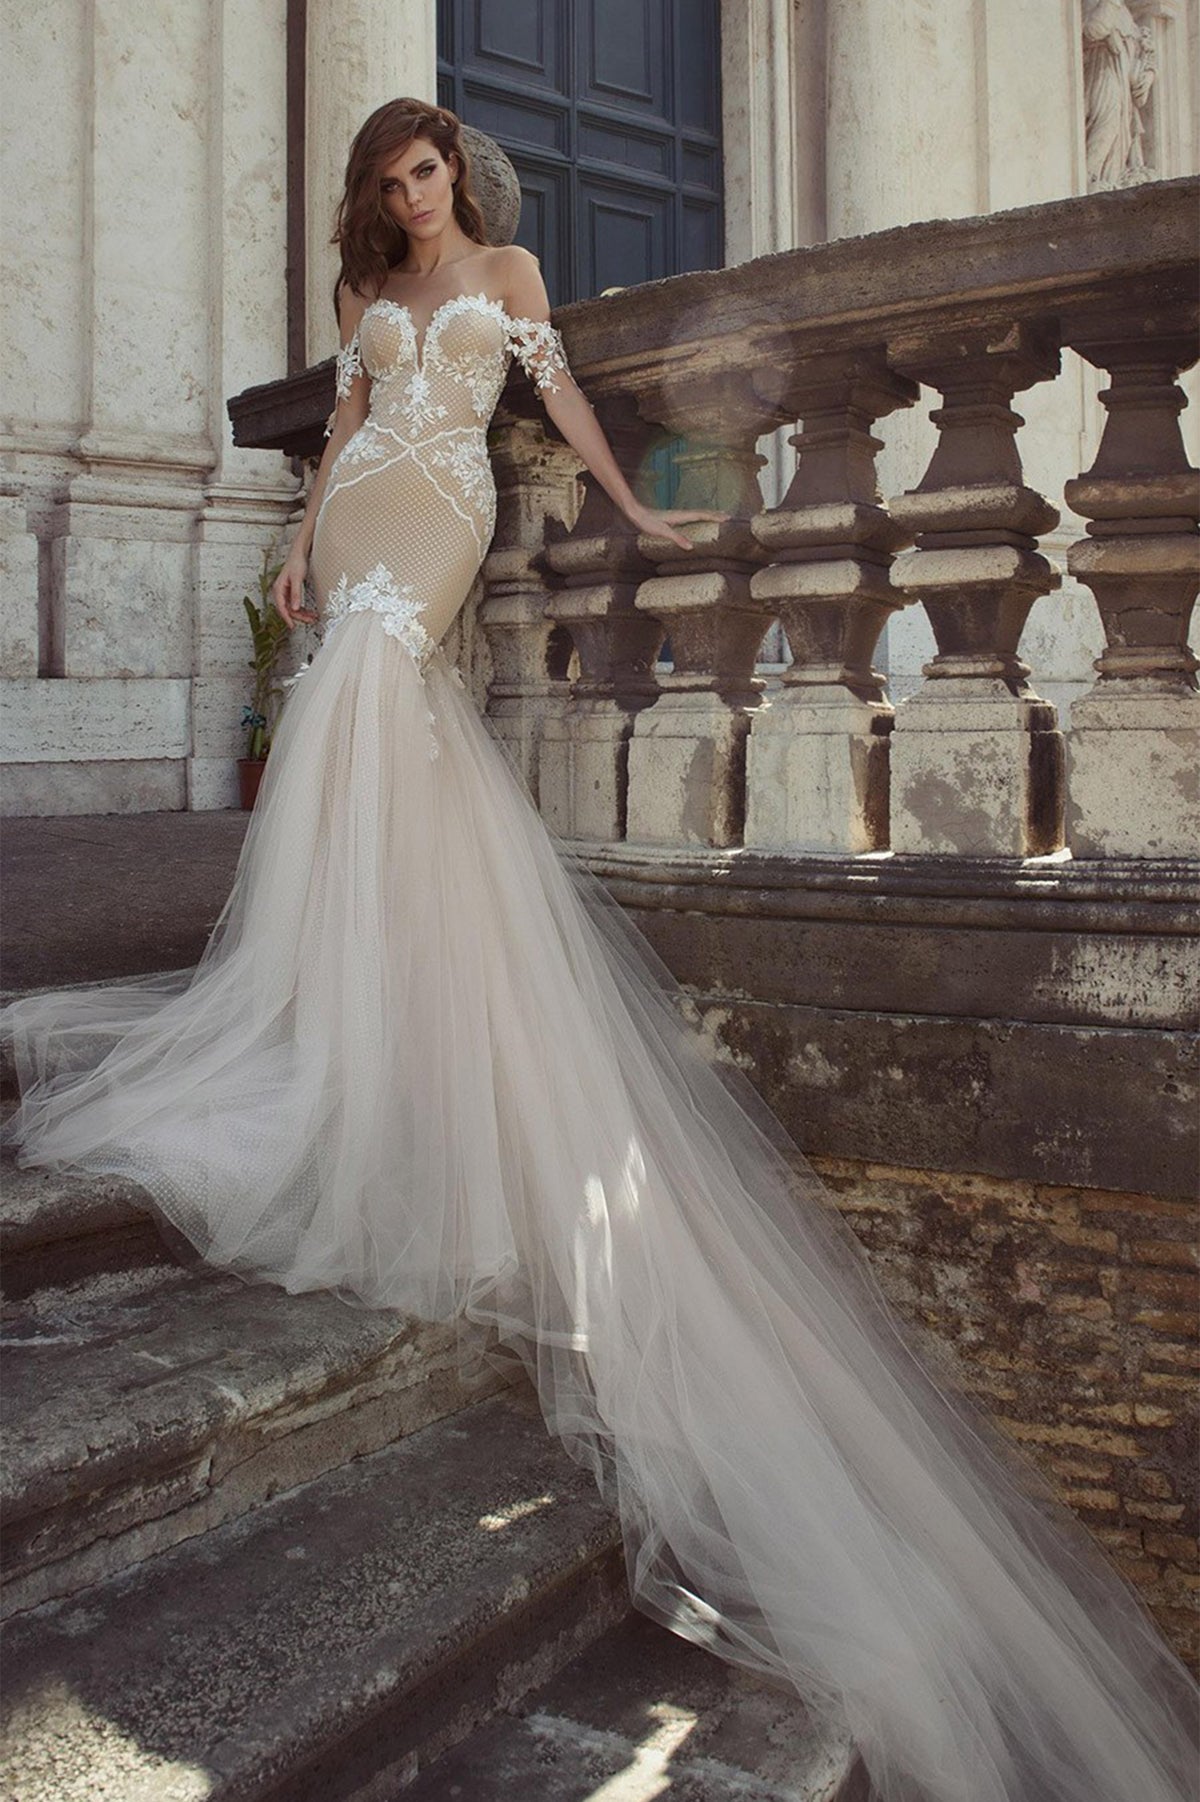 Mermaid Wedding Gown | The Lovely Find Wedding Gown